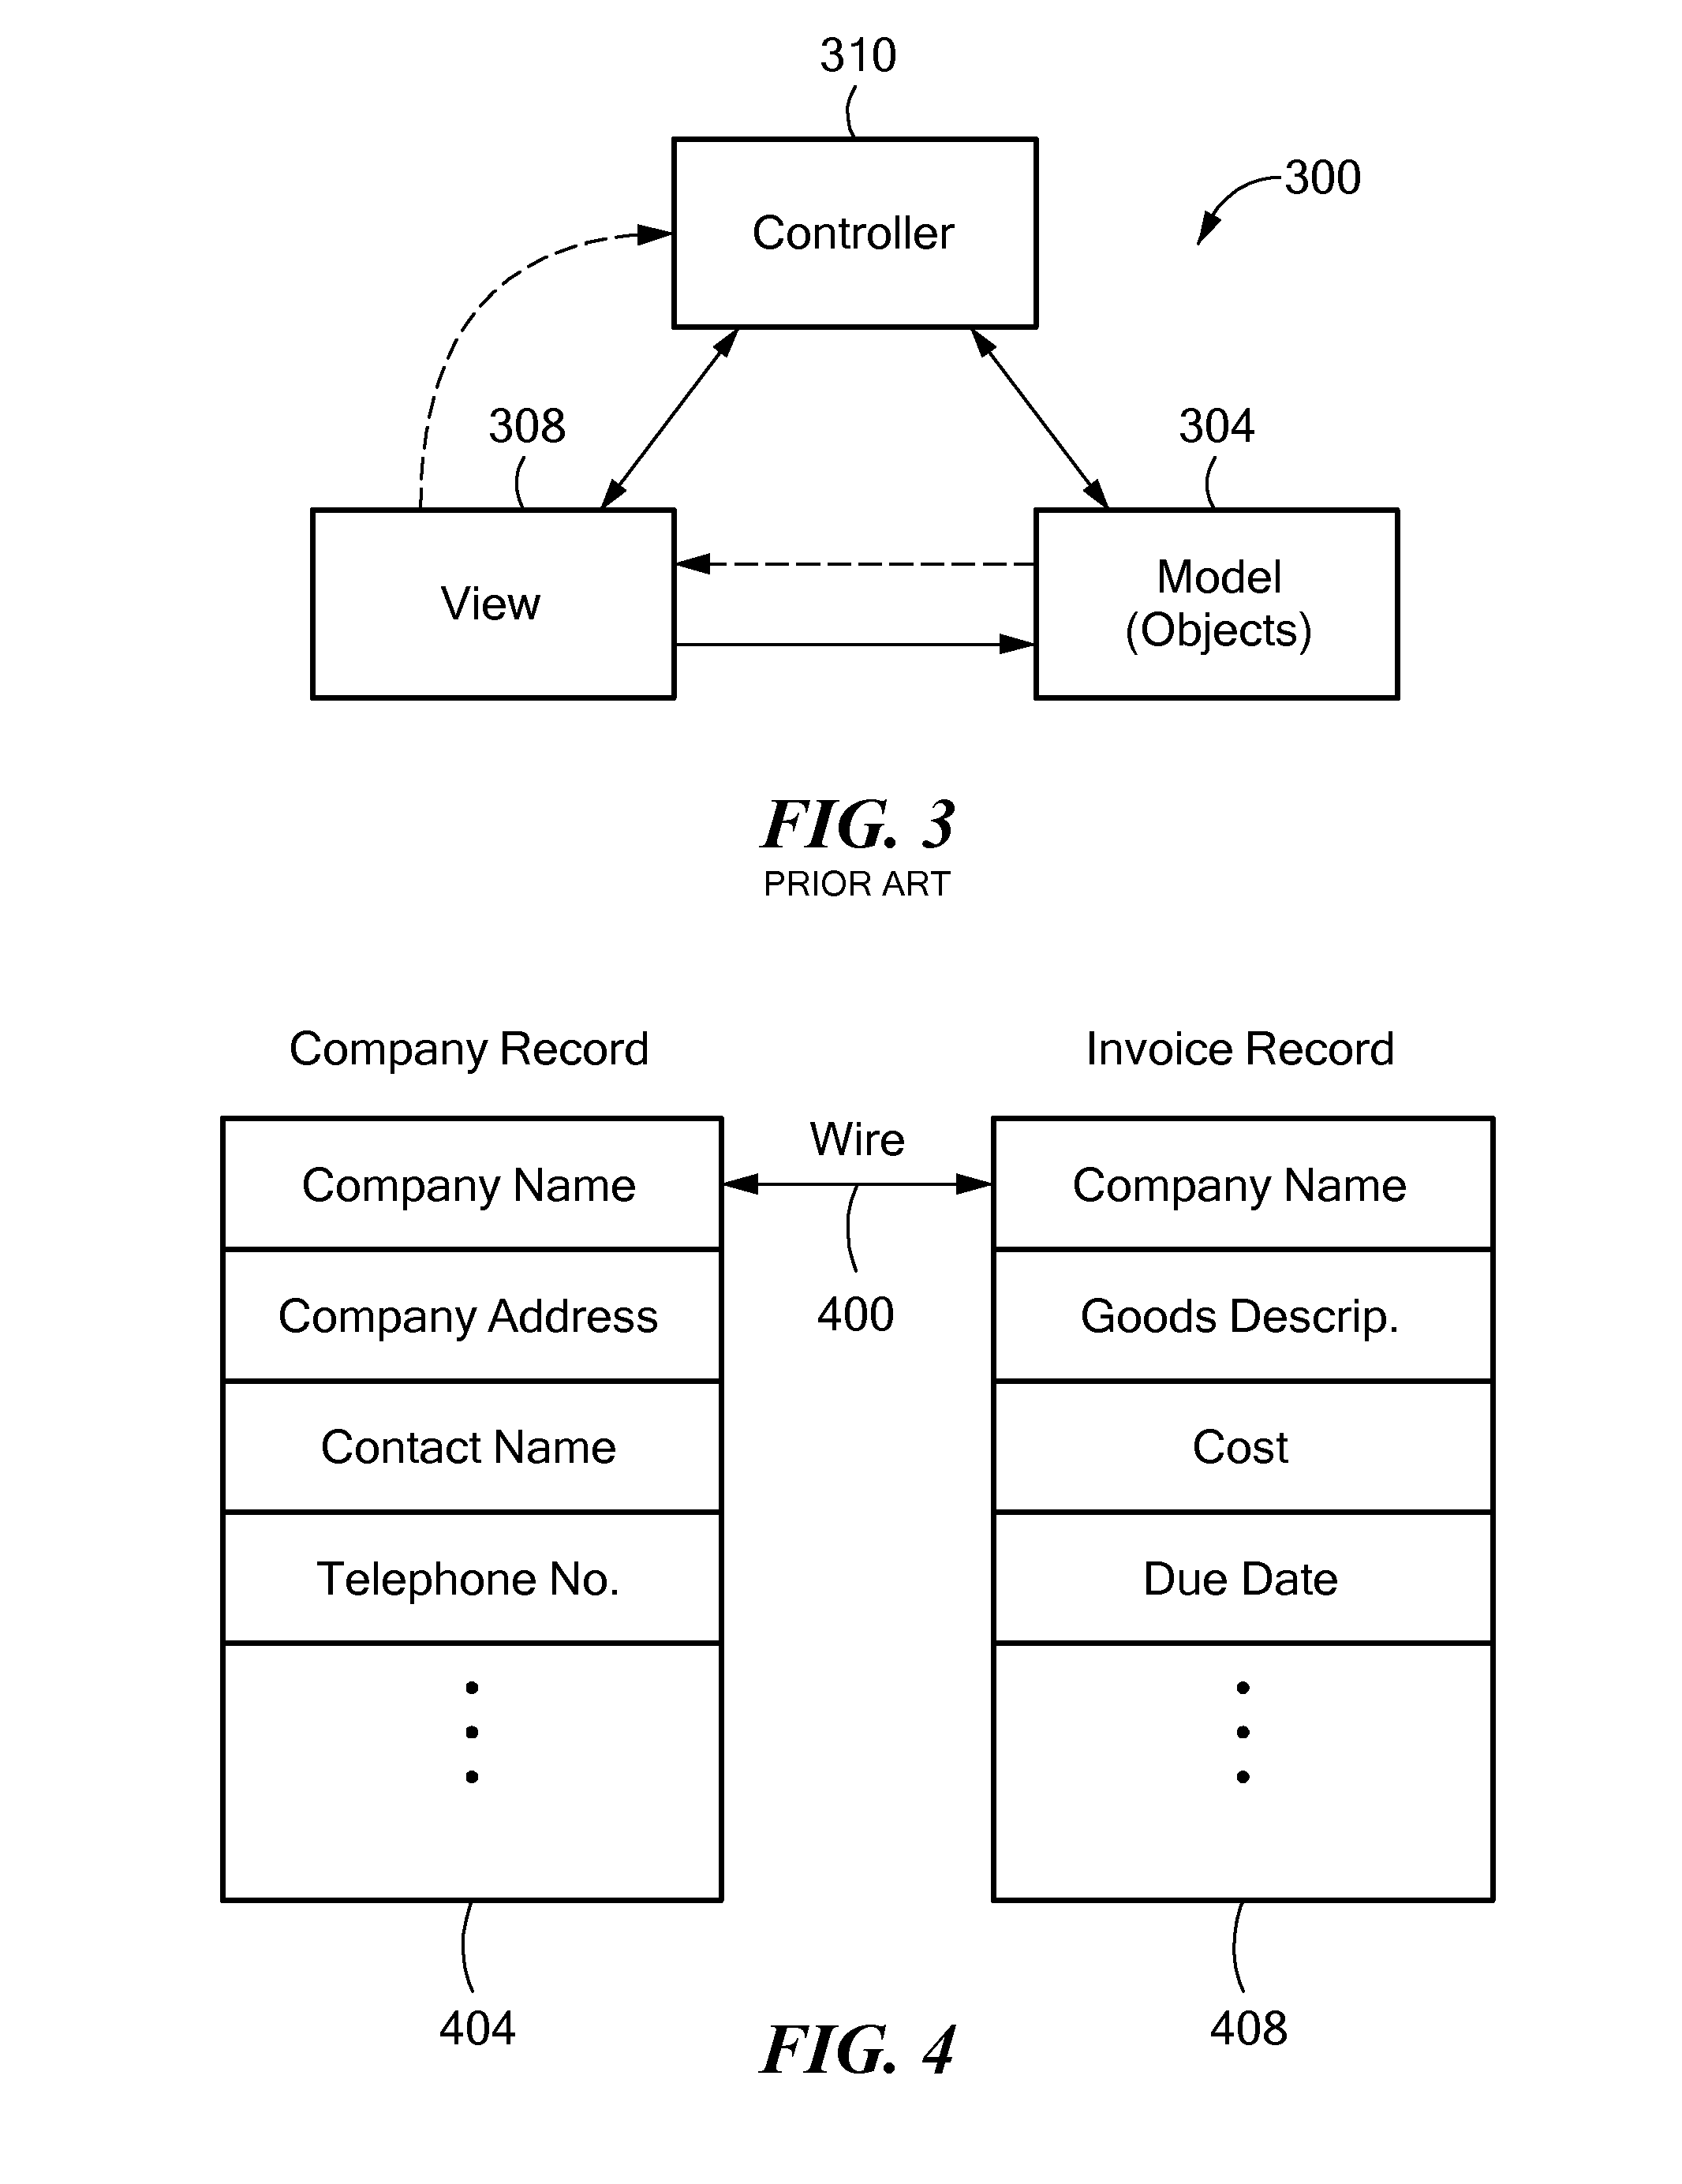 Apparatus and Method for Constructing Data Applications in an Unstructured Data Environment